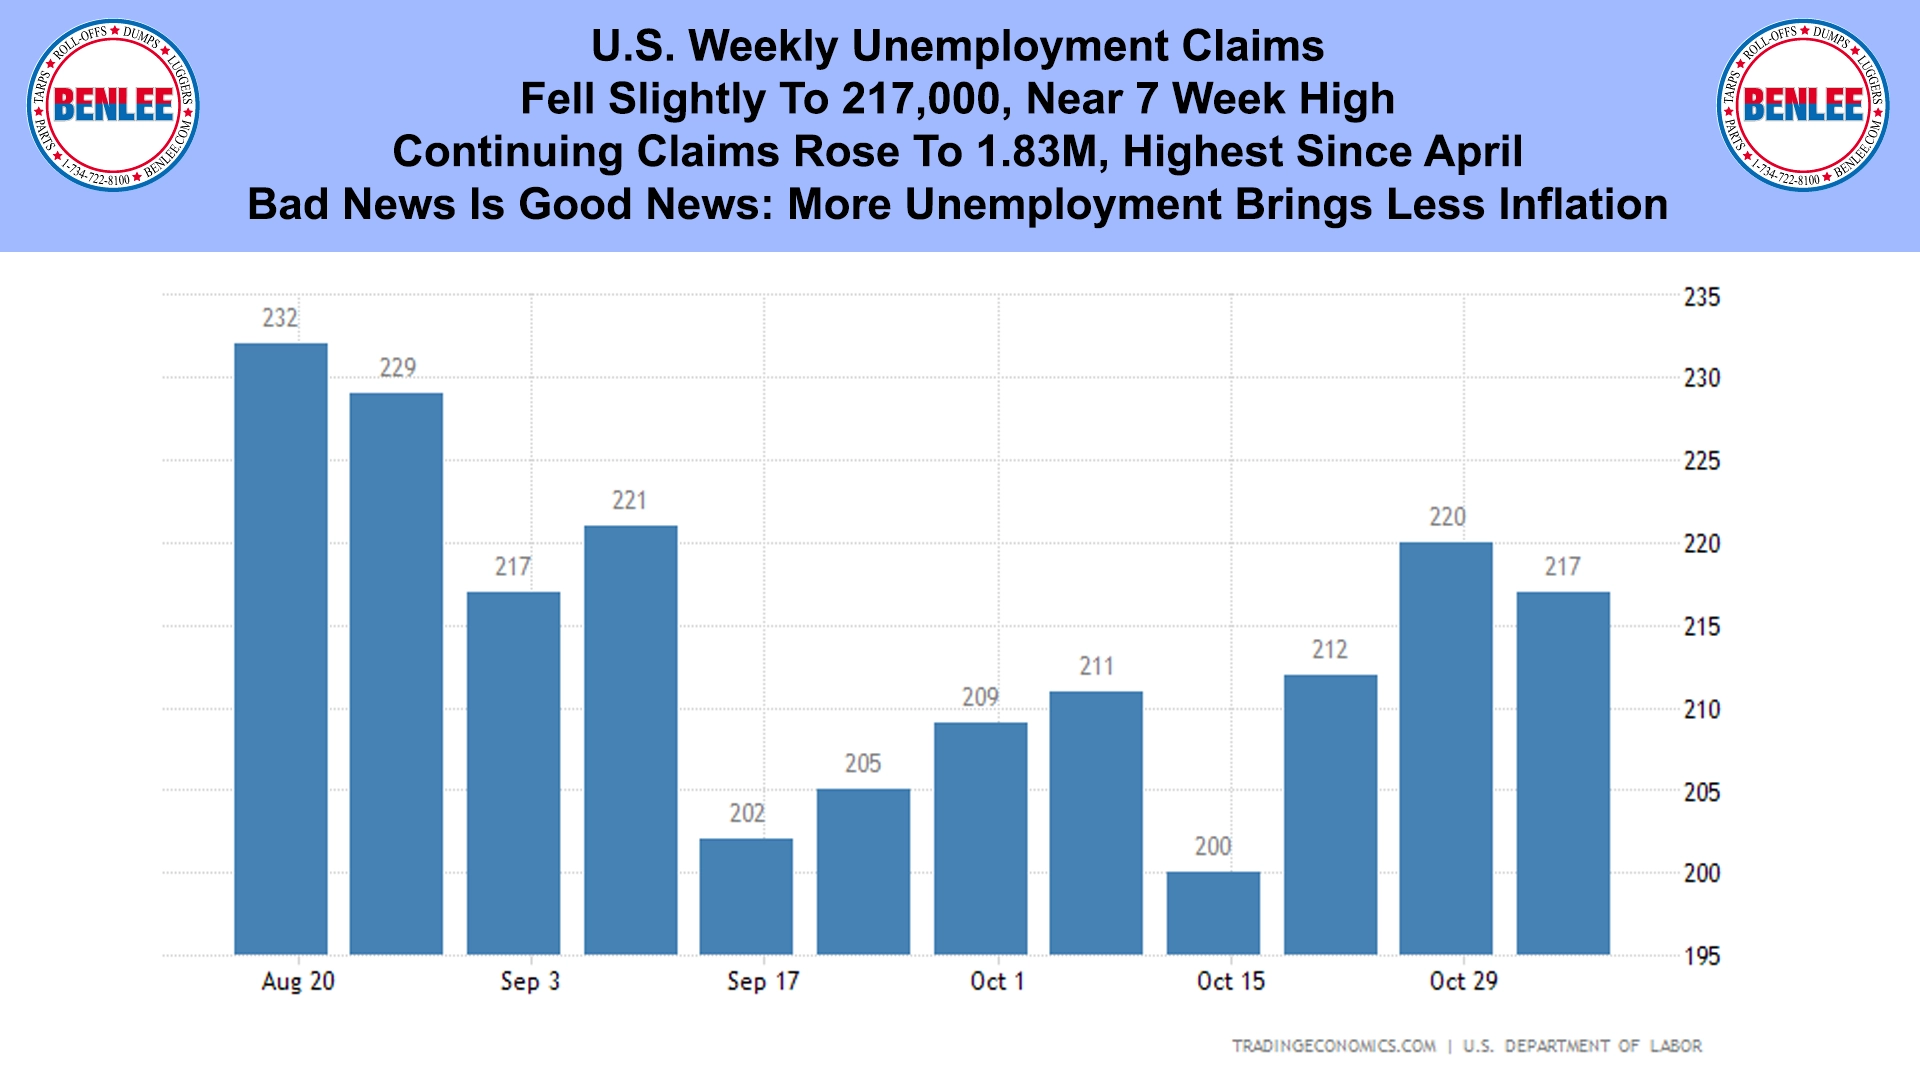 U.S. Weekly Unemployment Claims